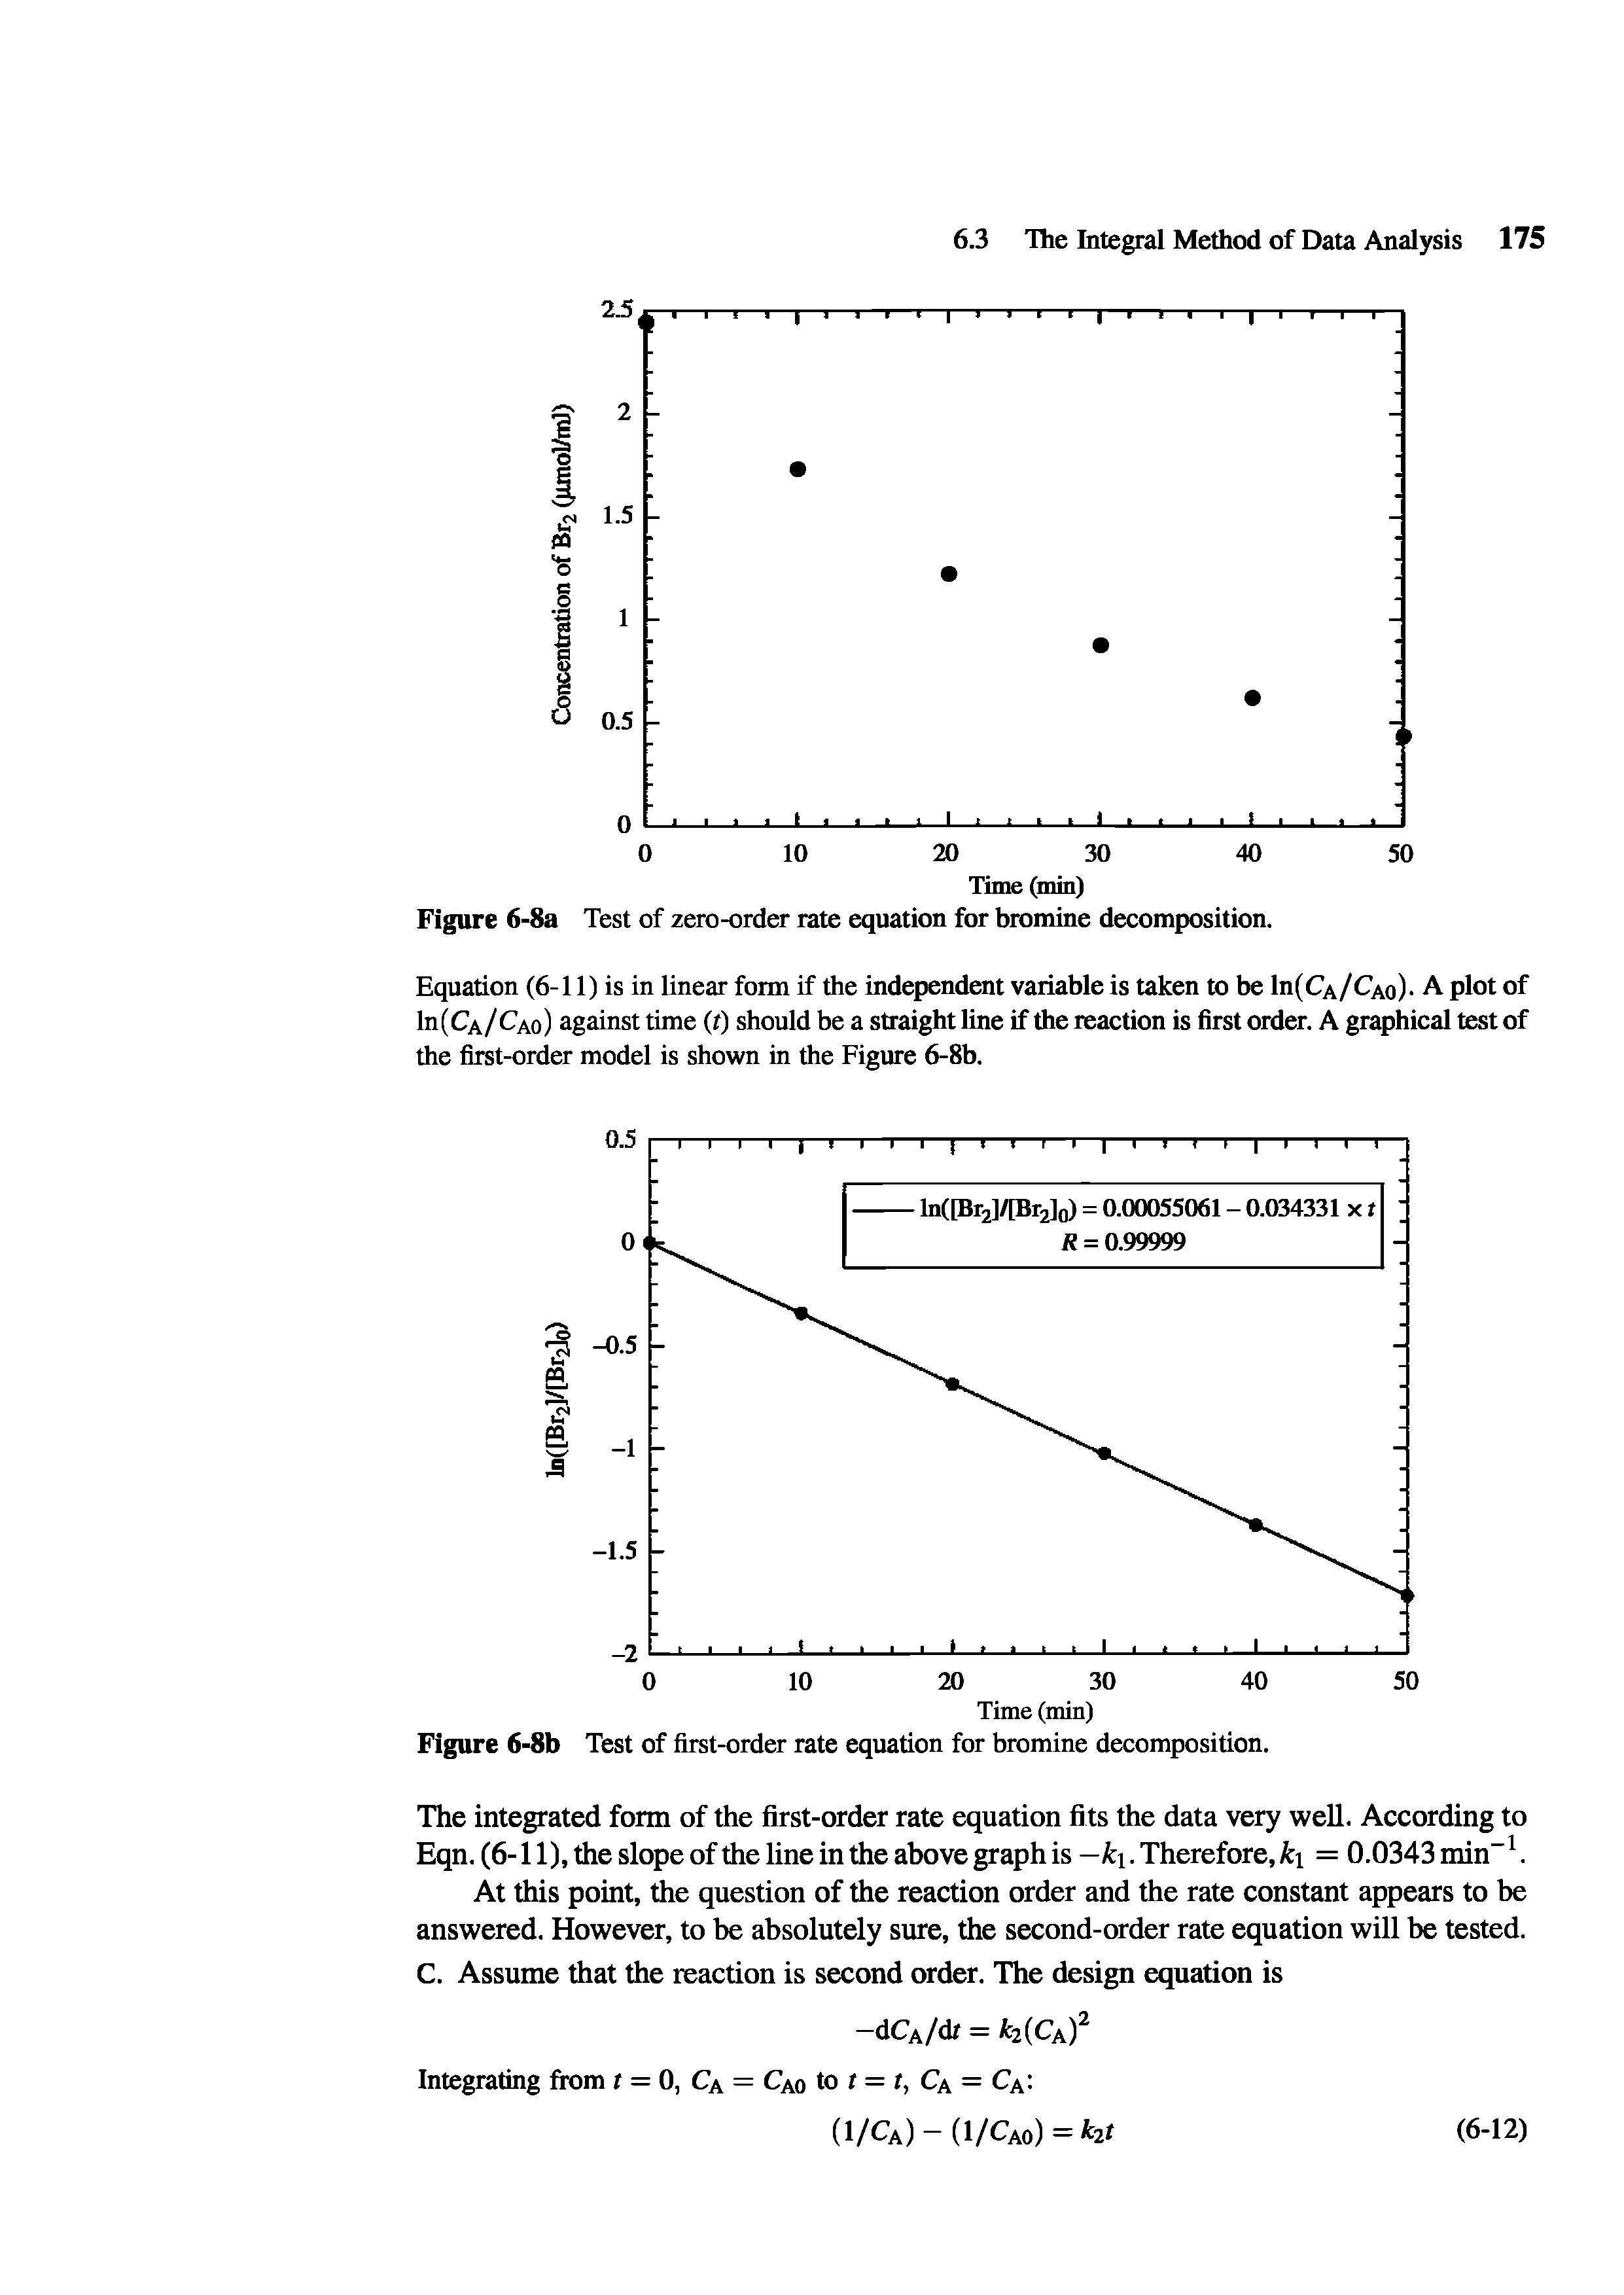 Figure 6-8b Test of first-order rate equation for bromine decomposition.